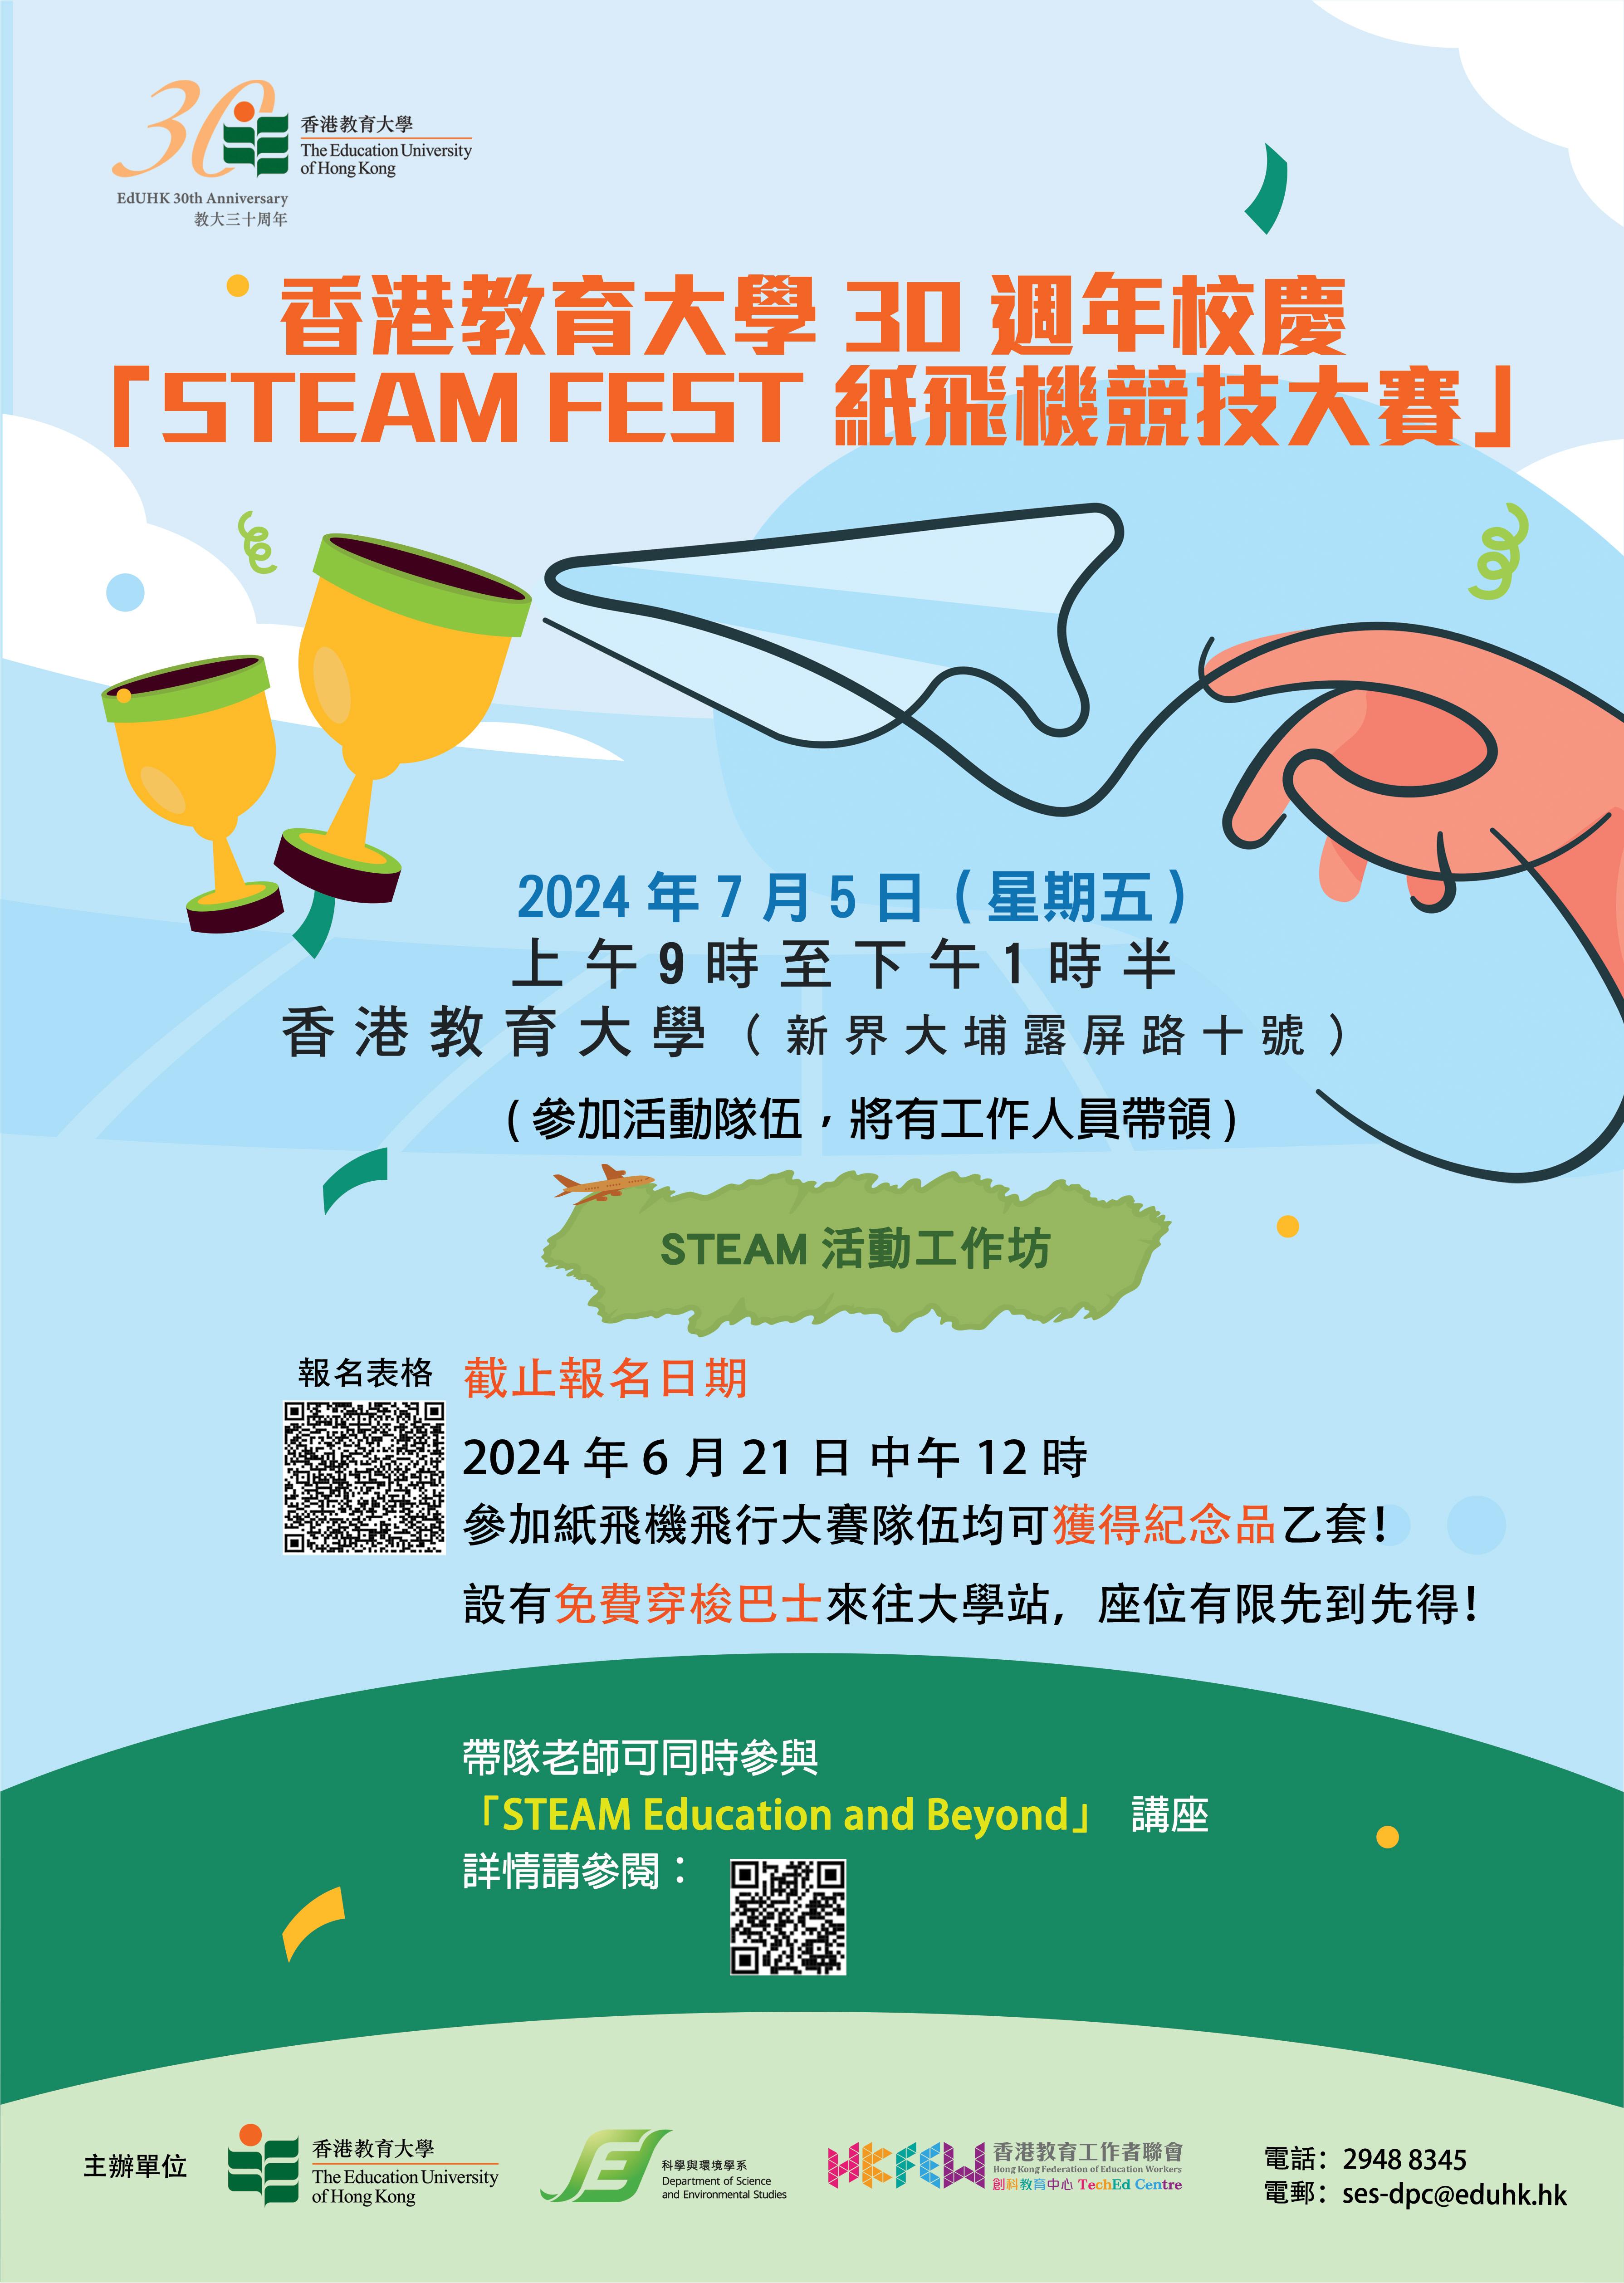 STEAM FEST Paper Airplane Competition